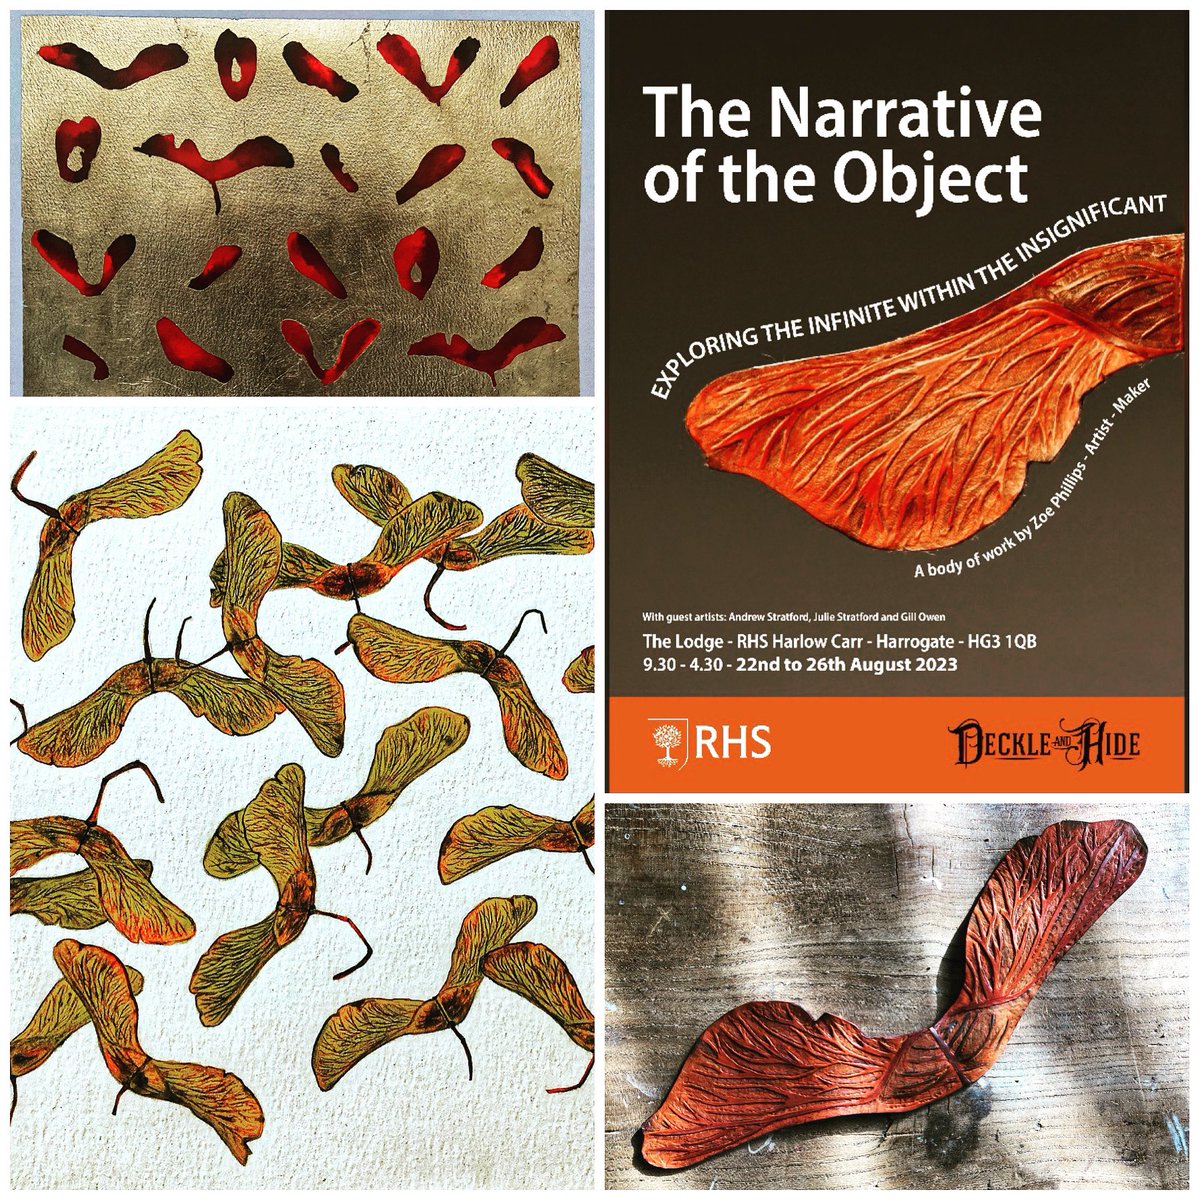 ‘The Narrative of the Object’ opens 22nd August @rhsharlowcarr

#bydeckleandhide #maker #artist #craft #installationcraft #installationart #upcomingexhibition #rhsharlowcarr #sycamore #narrativeoftheobject #object #artefact #narrative #connection #linesofconnection